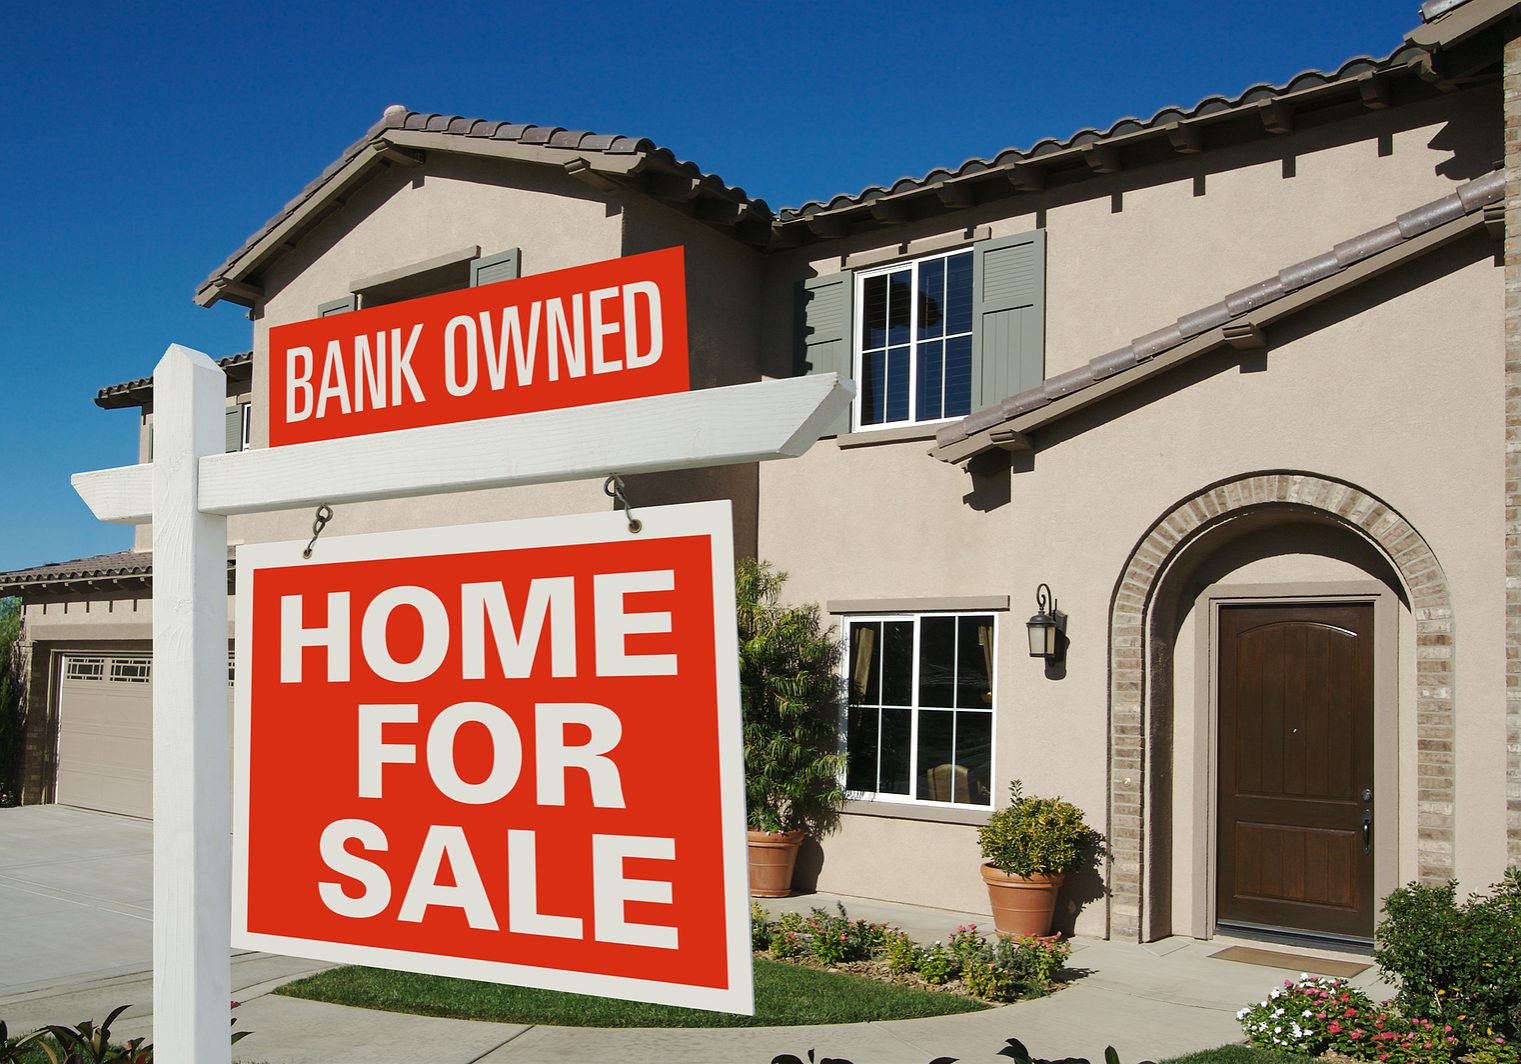 Bank Owned Home For Sale Sign in Front of New House on Deep Blue Sky